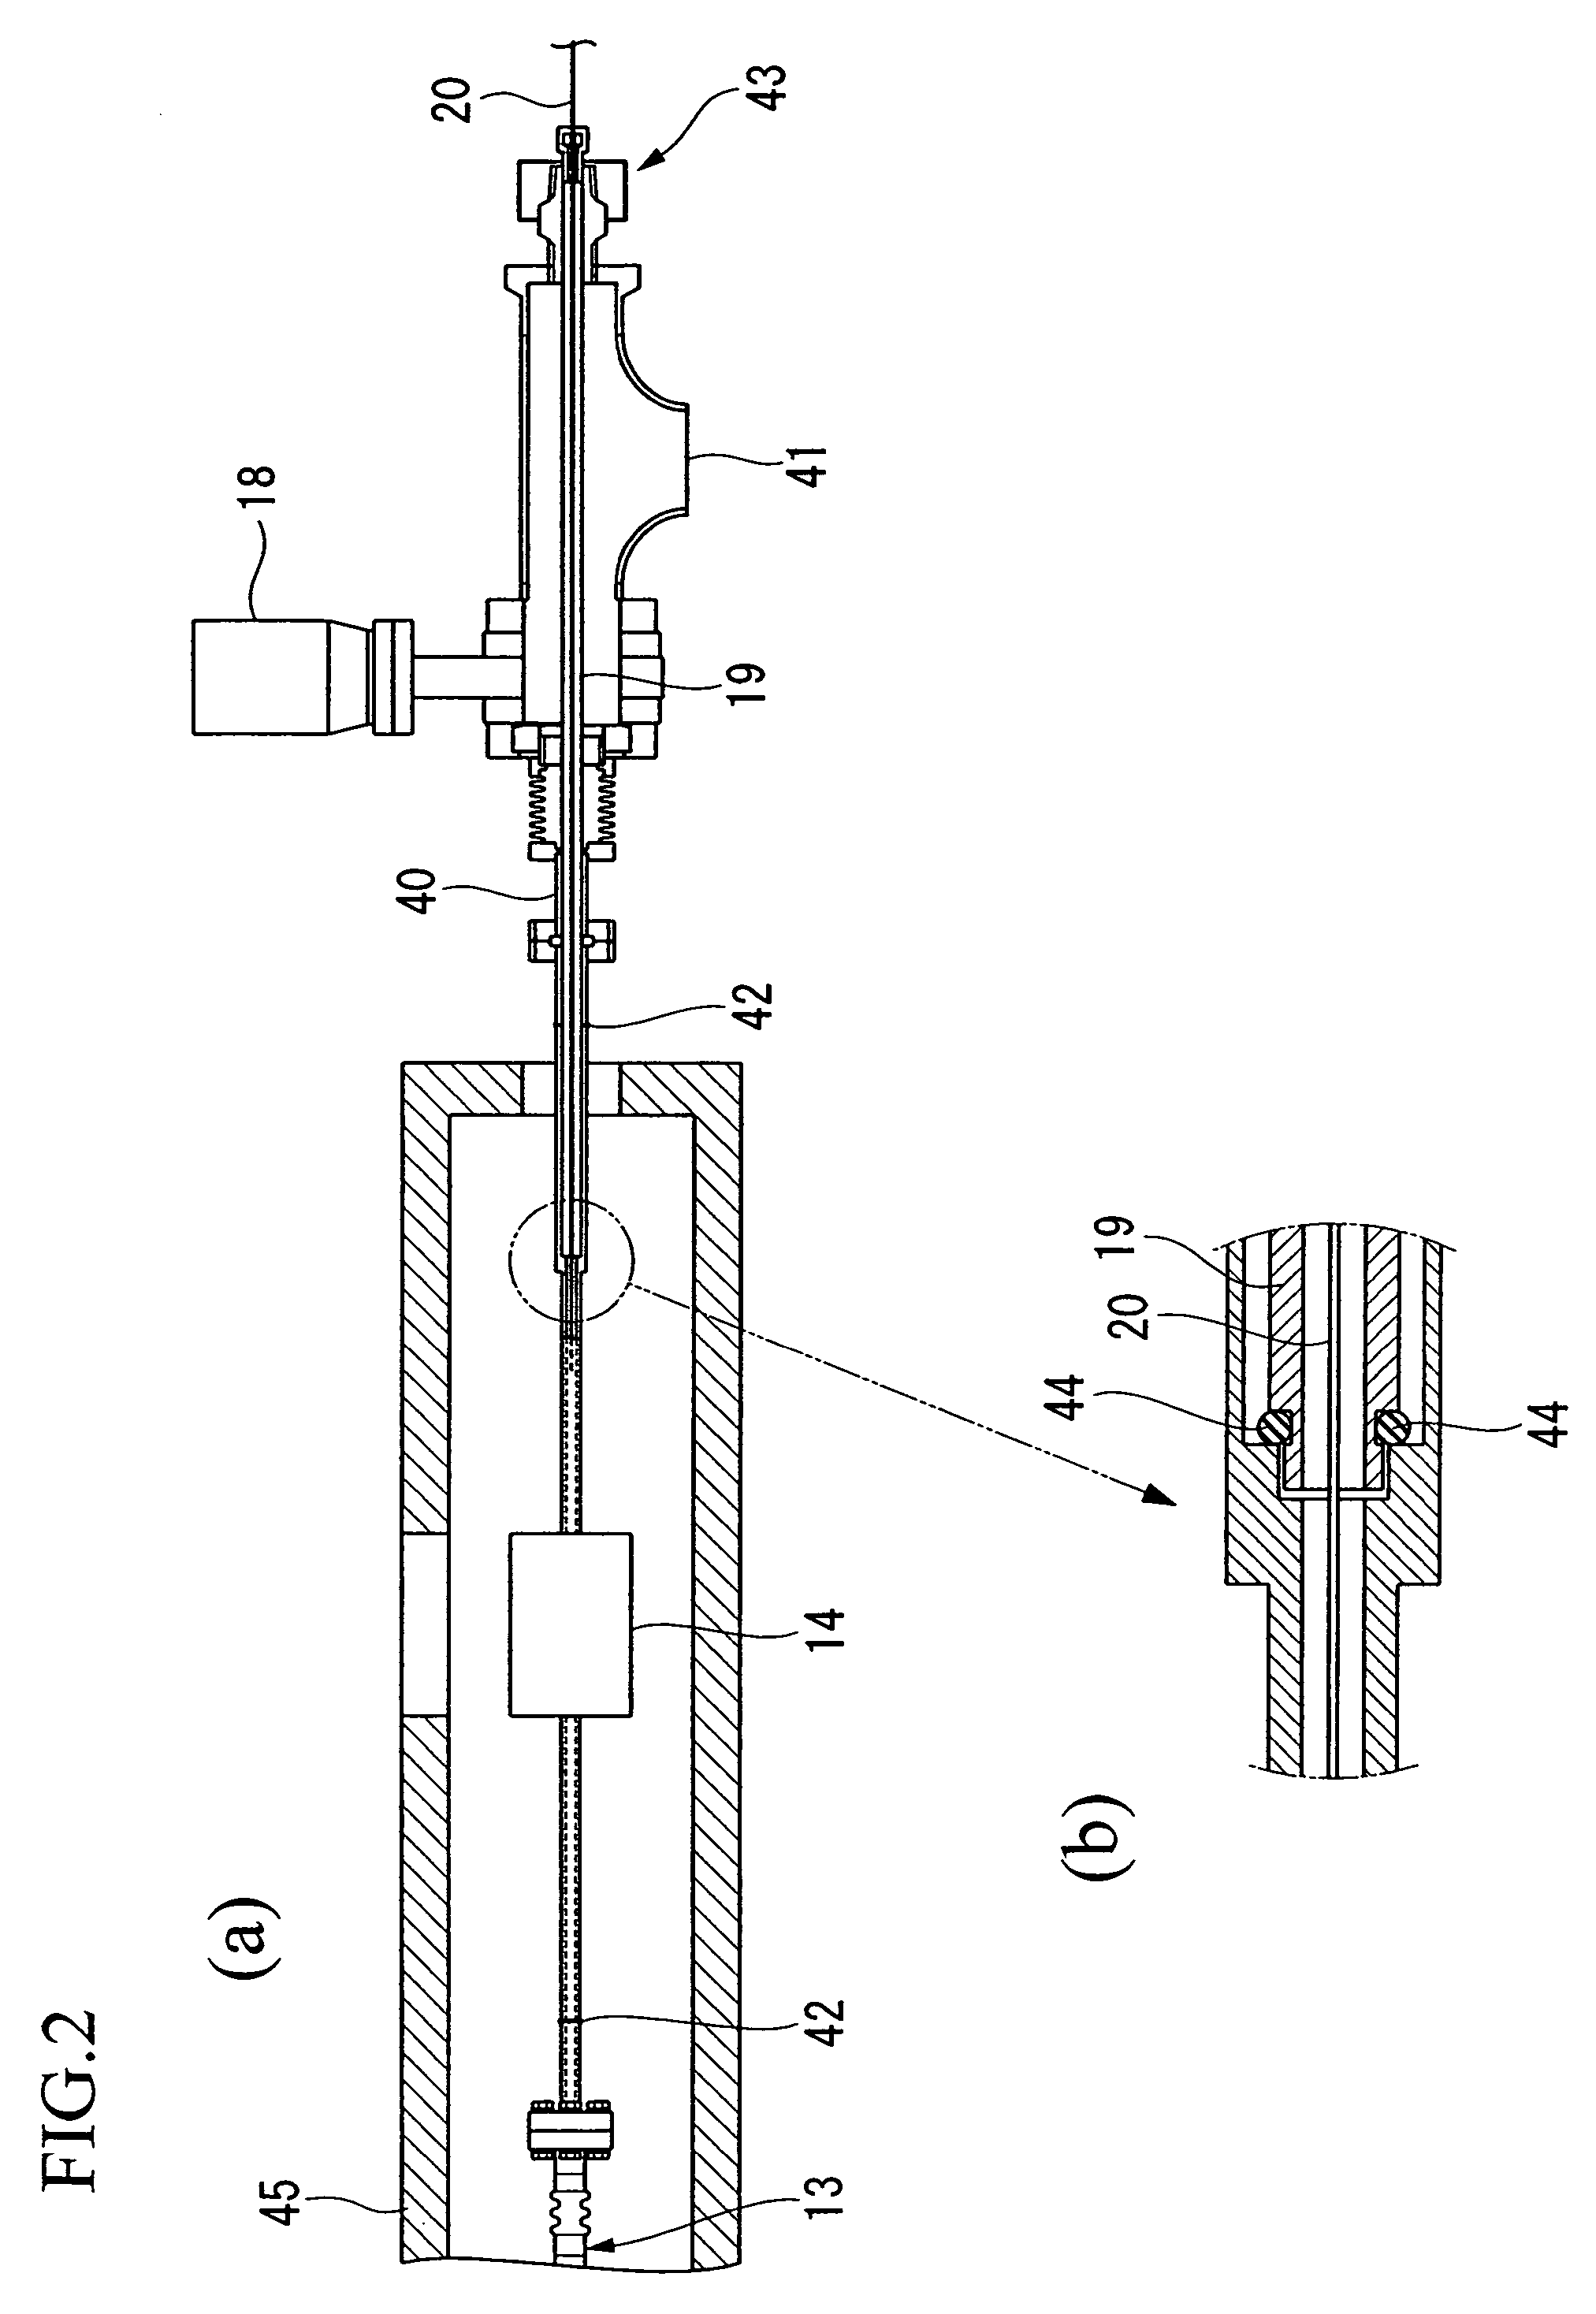 Apparatus for producing hyperpolarized noble gas, and nuclear magnetic resonance spectrometer and magnetic resonance imager which use hyperpolarized noble gases